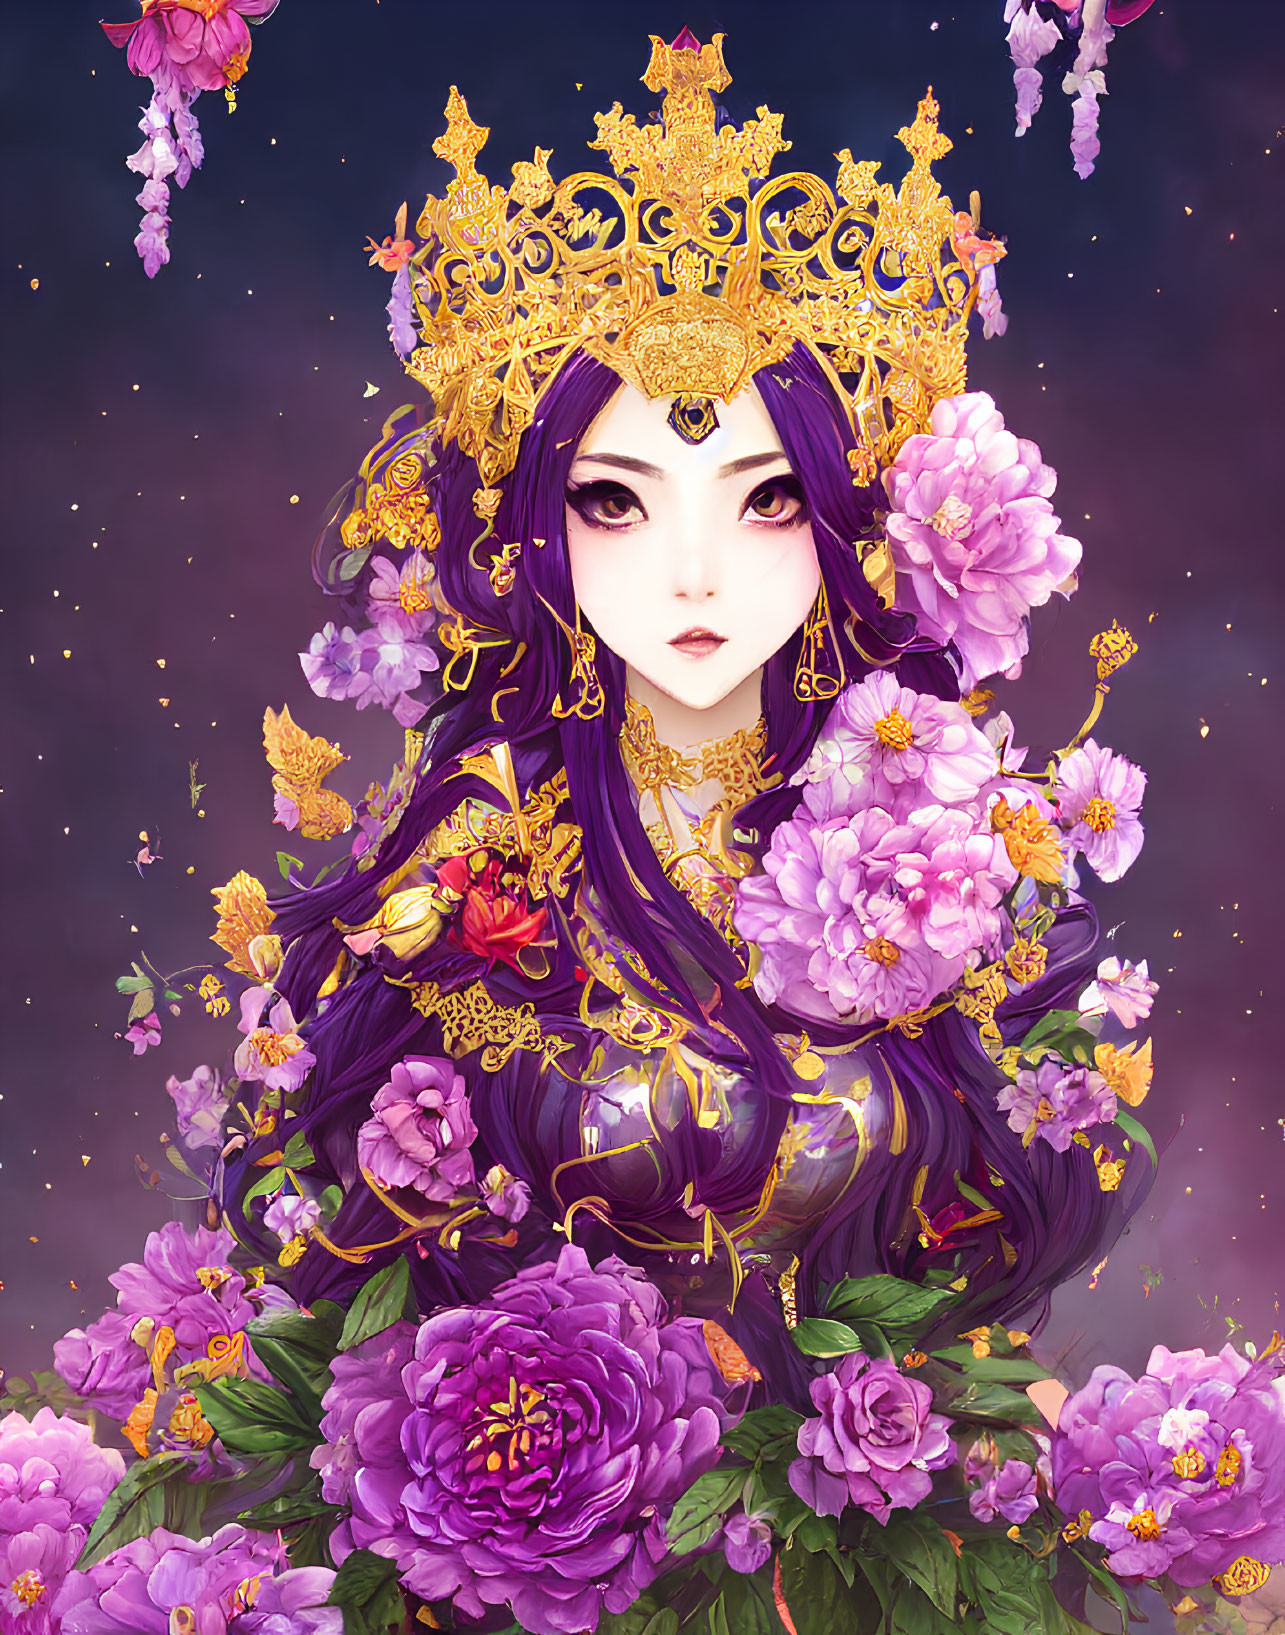 Regal woman with purple hair, golden crown, surrounded by flowers and butterflies on starry background